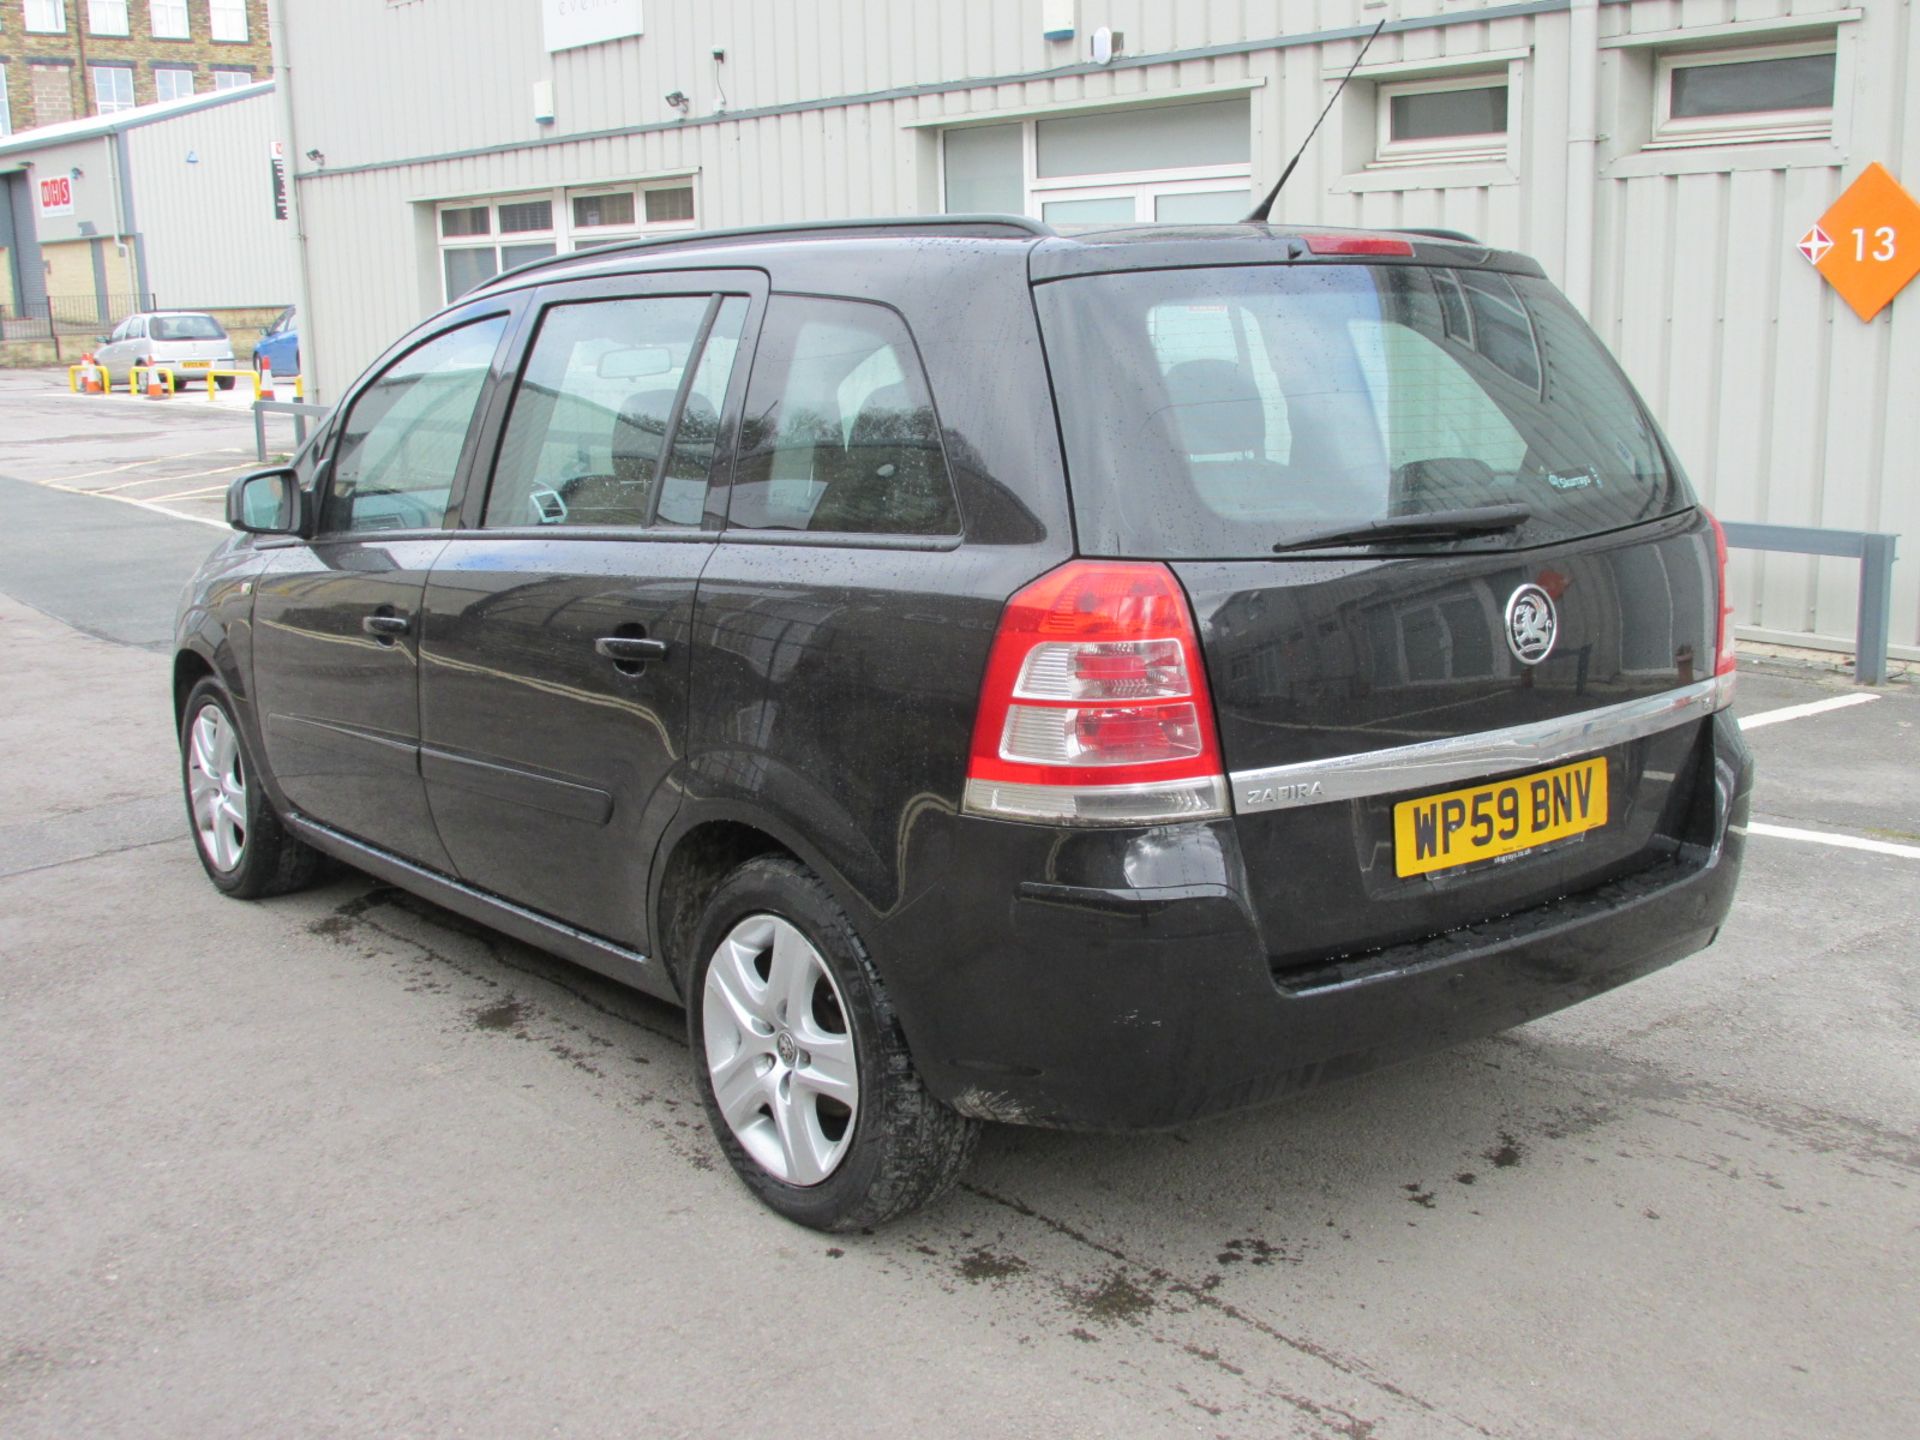 2009 Vauxhall Zafira 1.6i 16v Exclusive - 7 Seater MPV - Low Mileage - Image 7 of 14